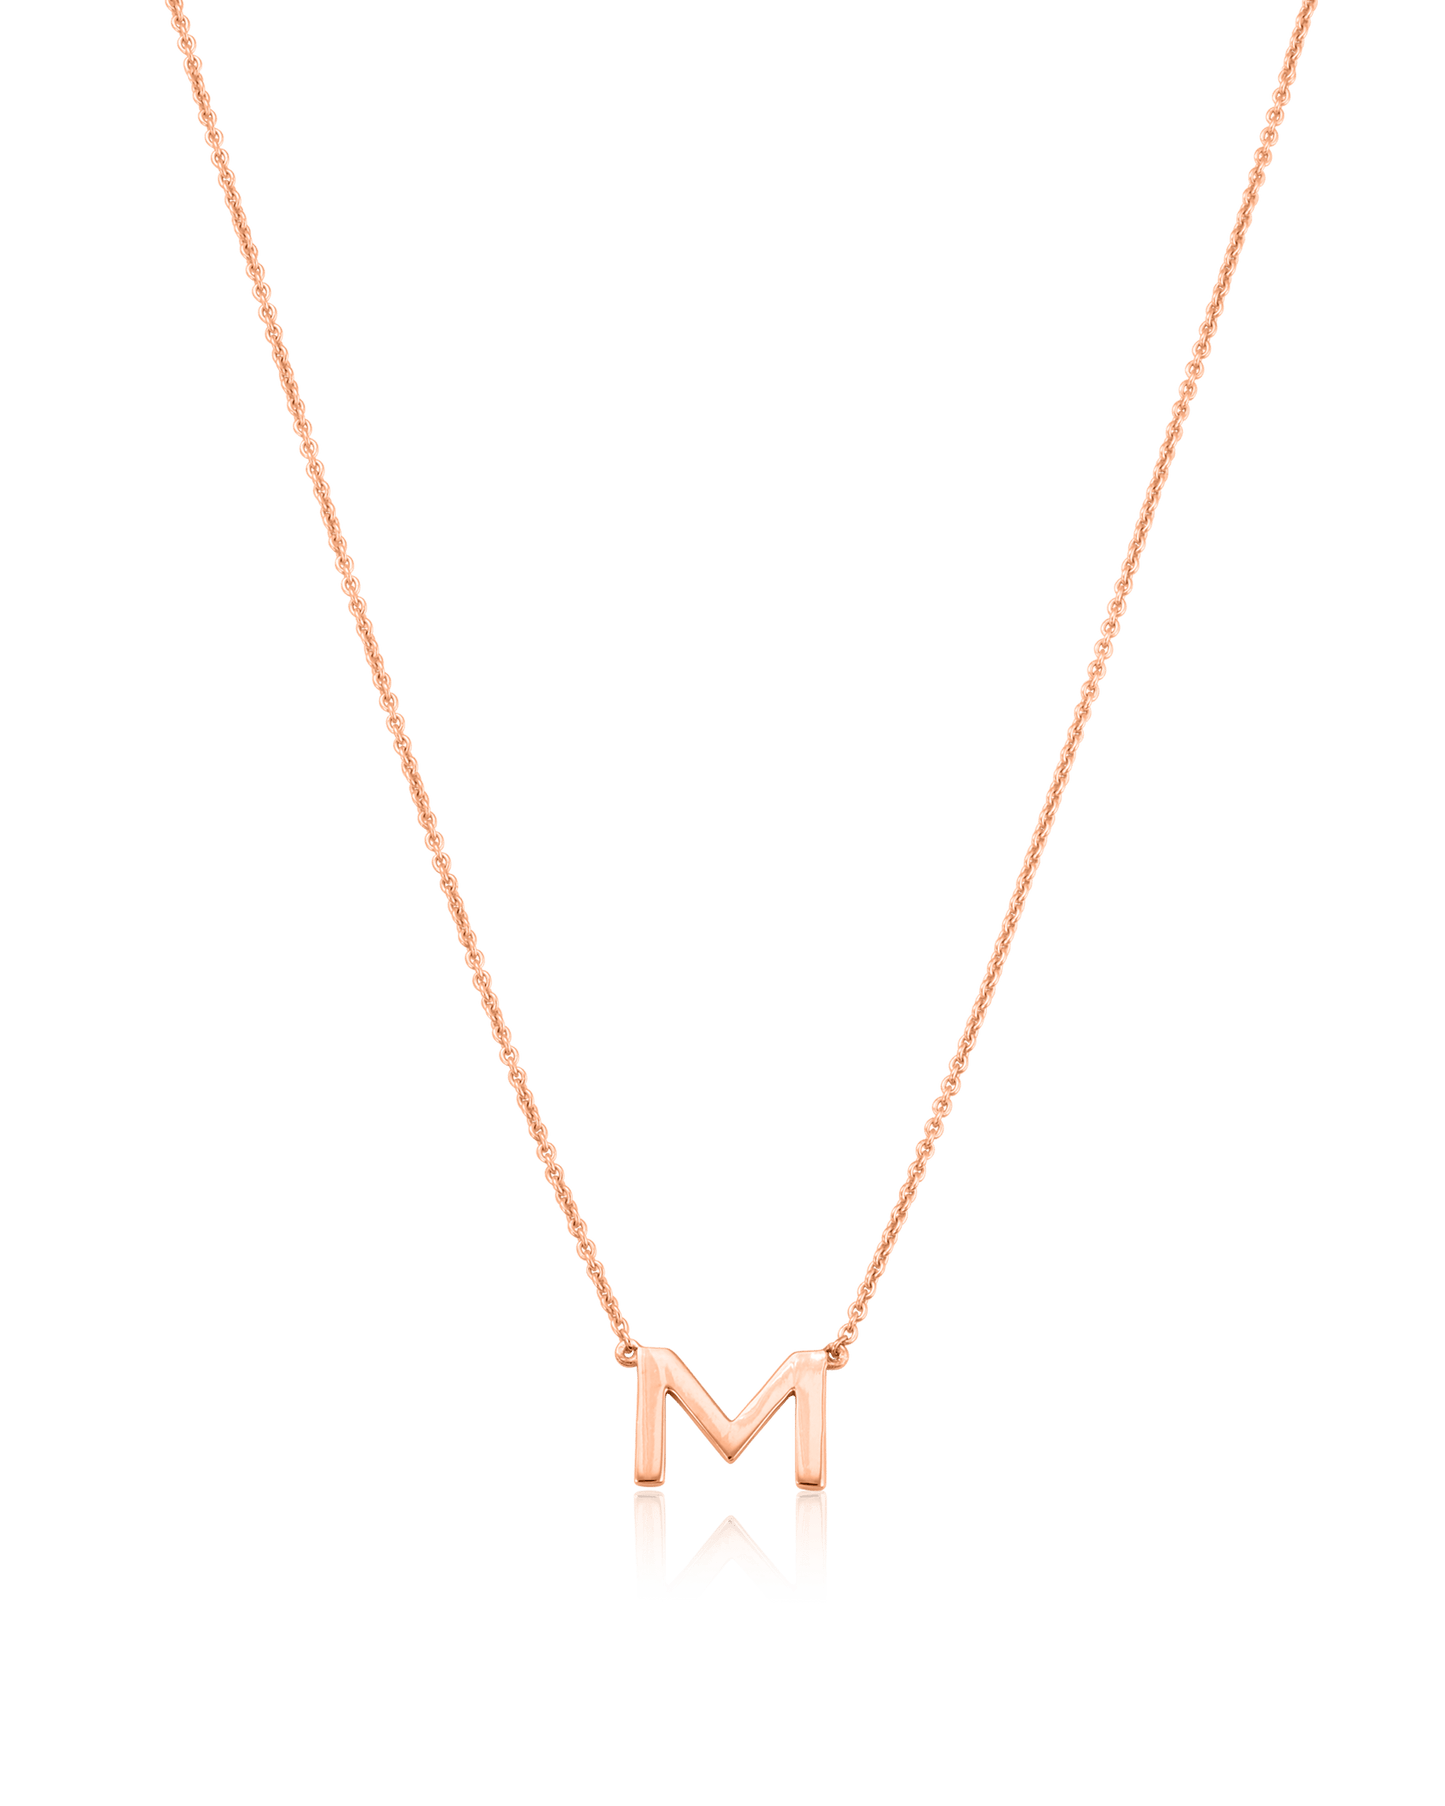 Immy Necklace - 14K White Gold Necklaces magal-dev 